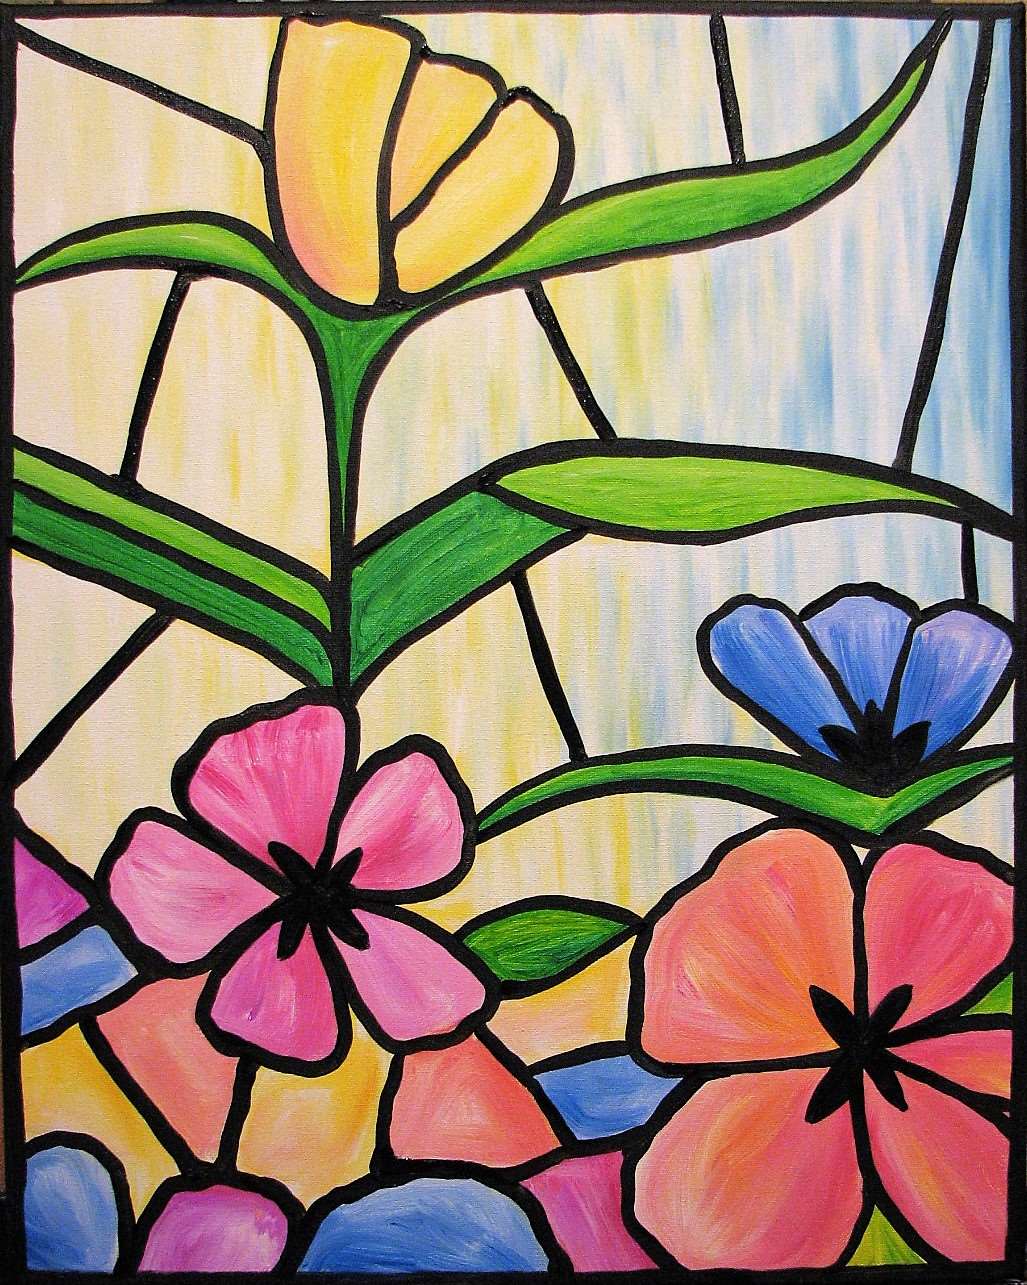 Stained Glass Garden - Sun, Apr 03 3PM at Ellicott City